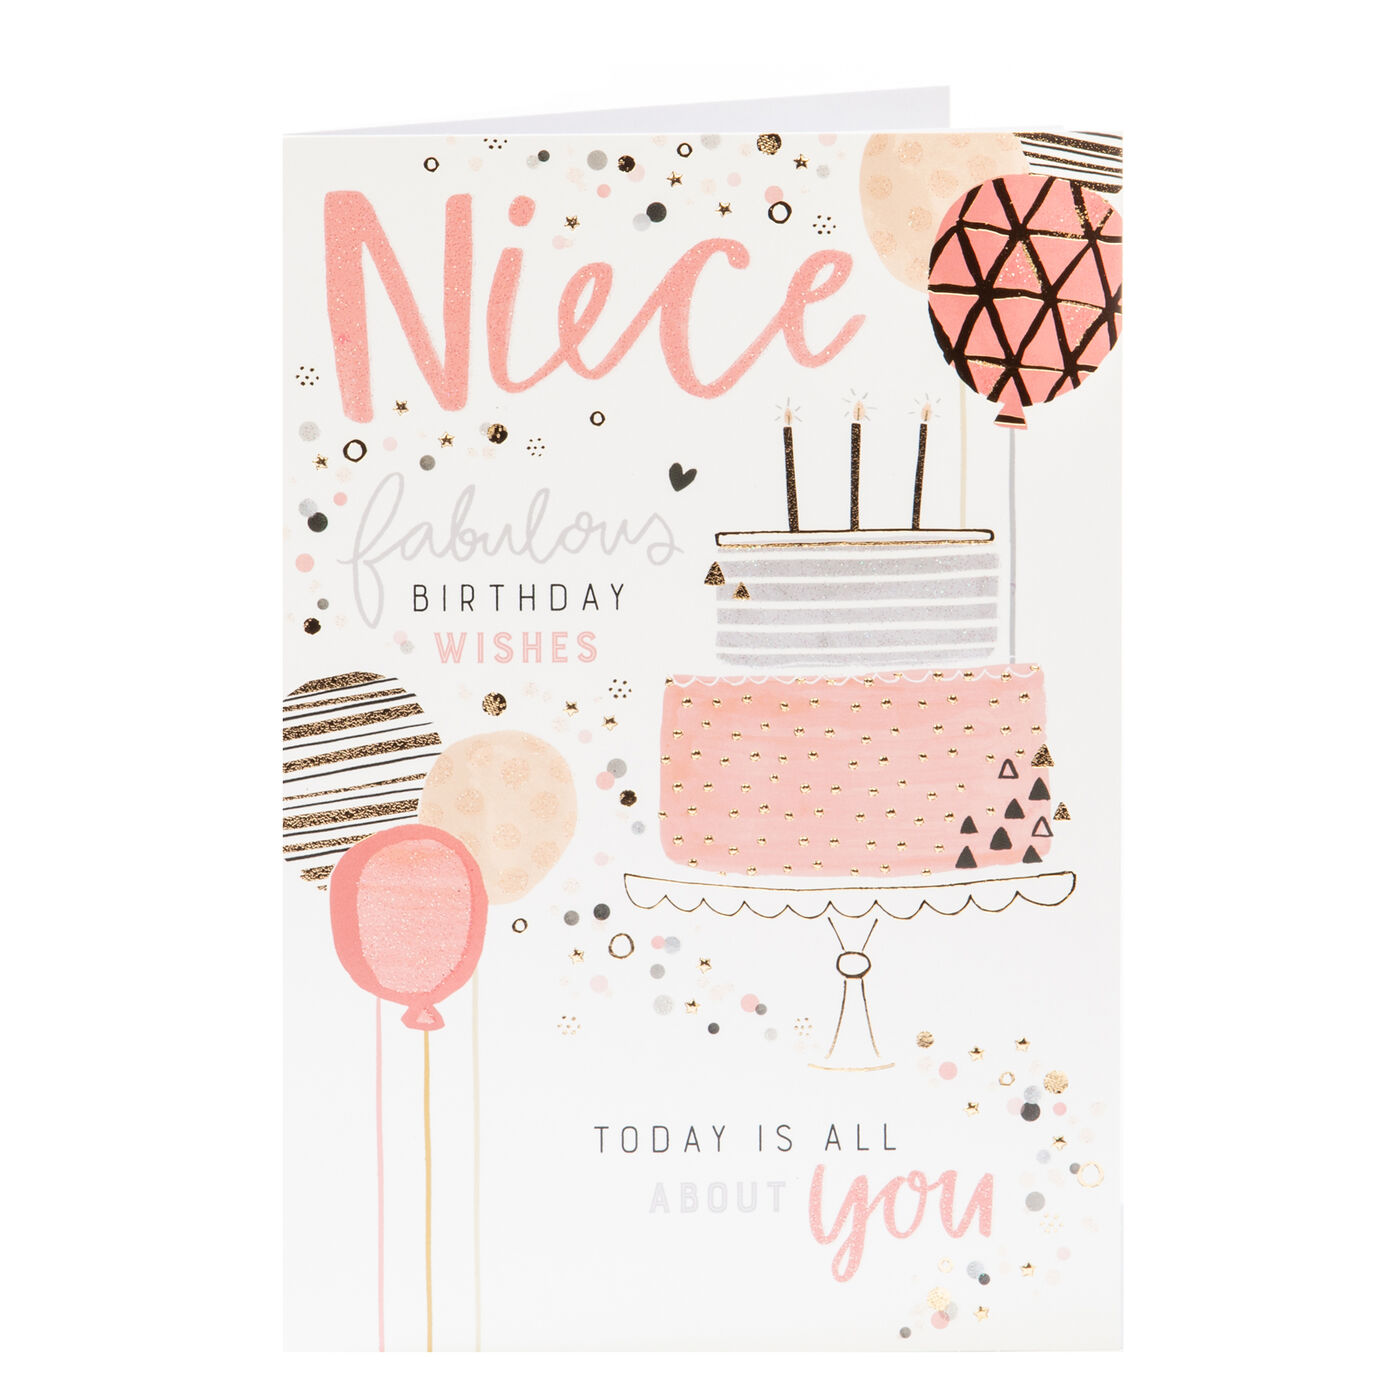 buy-birthday-card-niece-fabulous-wishes-for-gbp-0-99-card-factory-uk